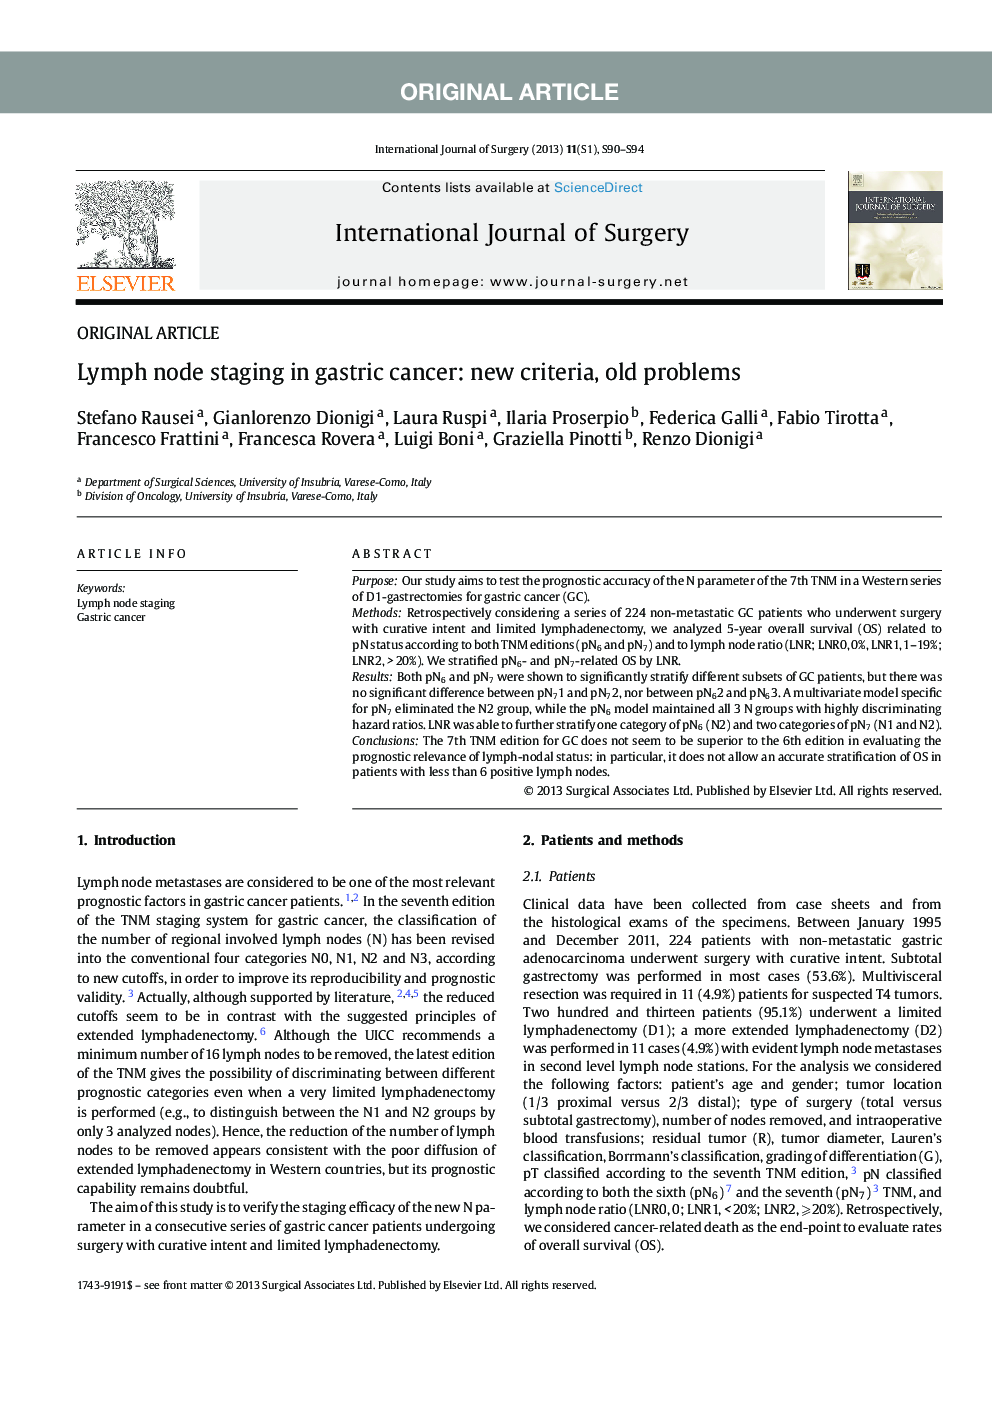 Lymph node staging in gastric cancer: new criteria, old problems